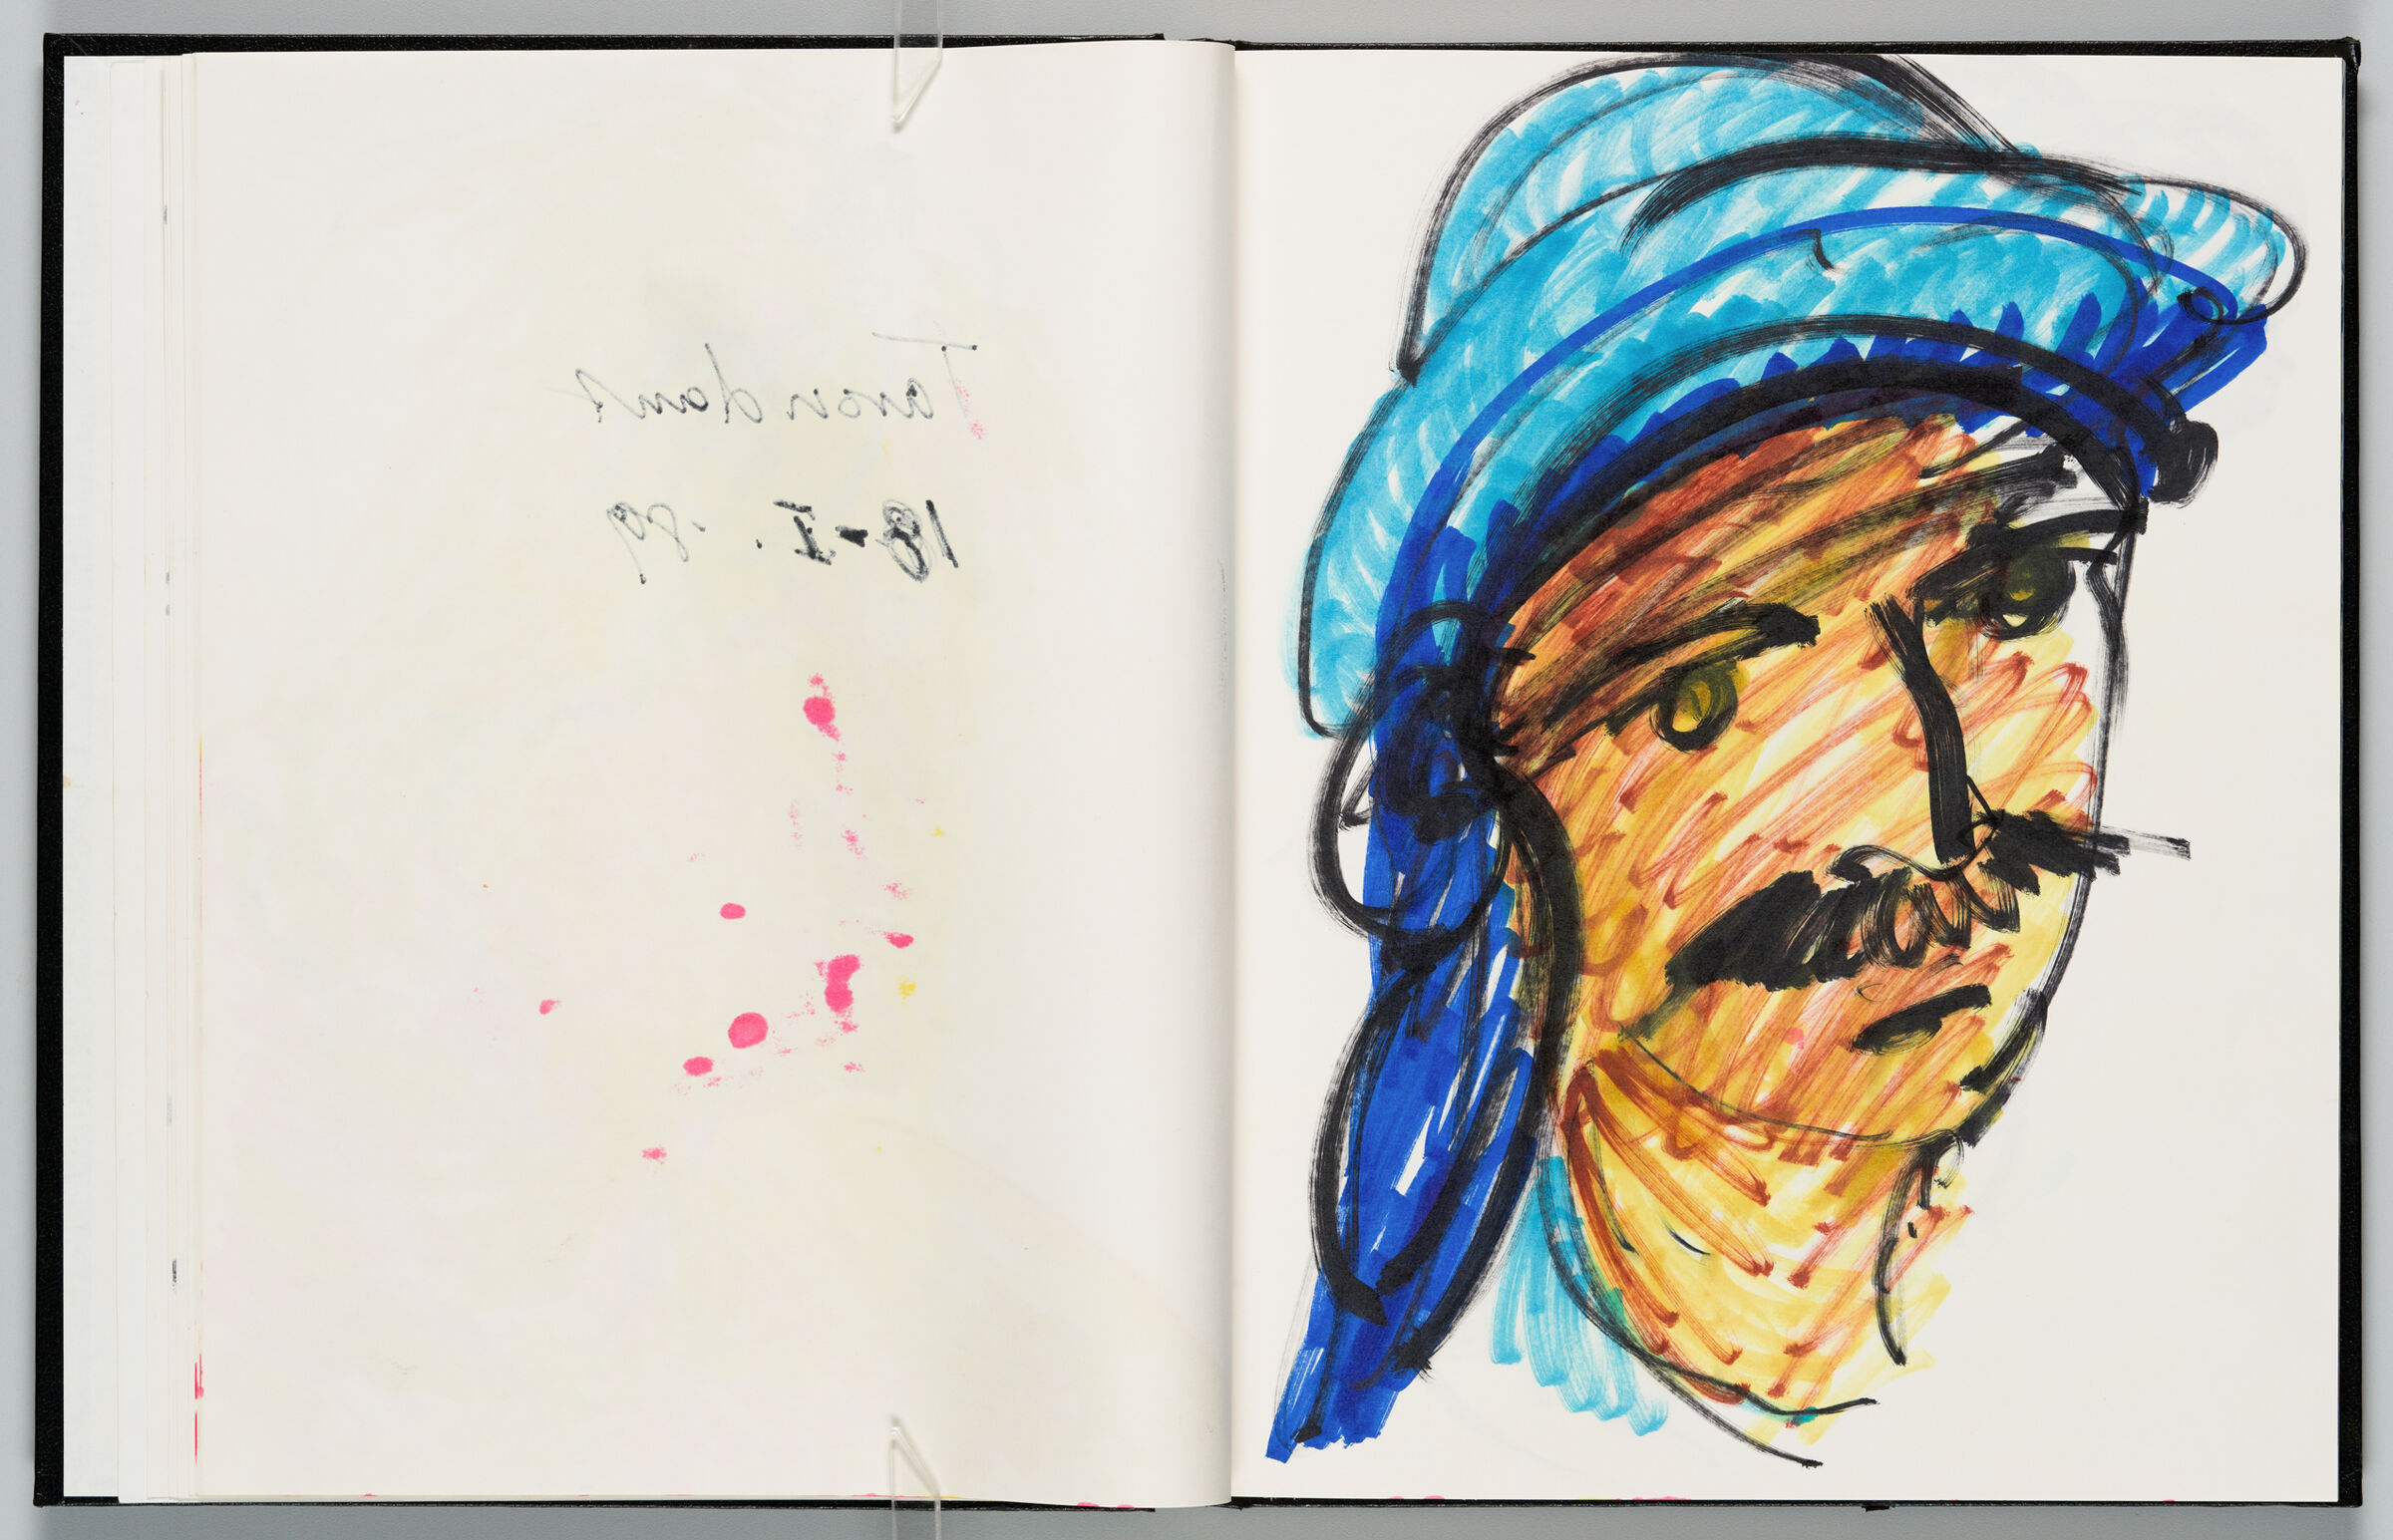 Untitled (Bleed-Through Of Previous Page, Left Page); Untitled (Study Of Male Head In Tagelmust, Right Page)